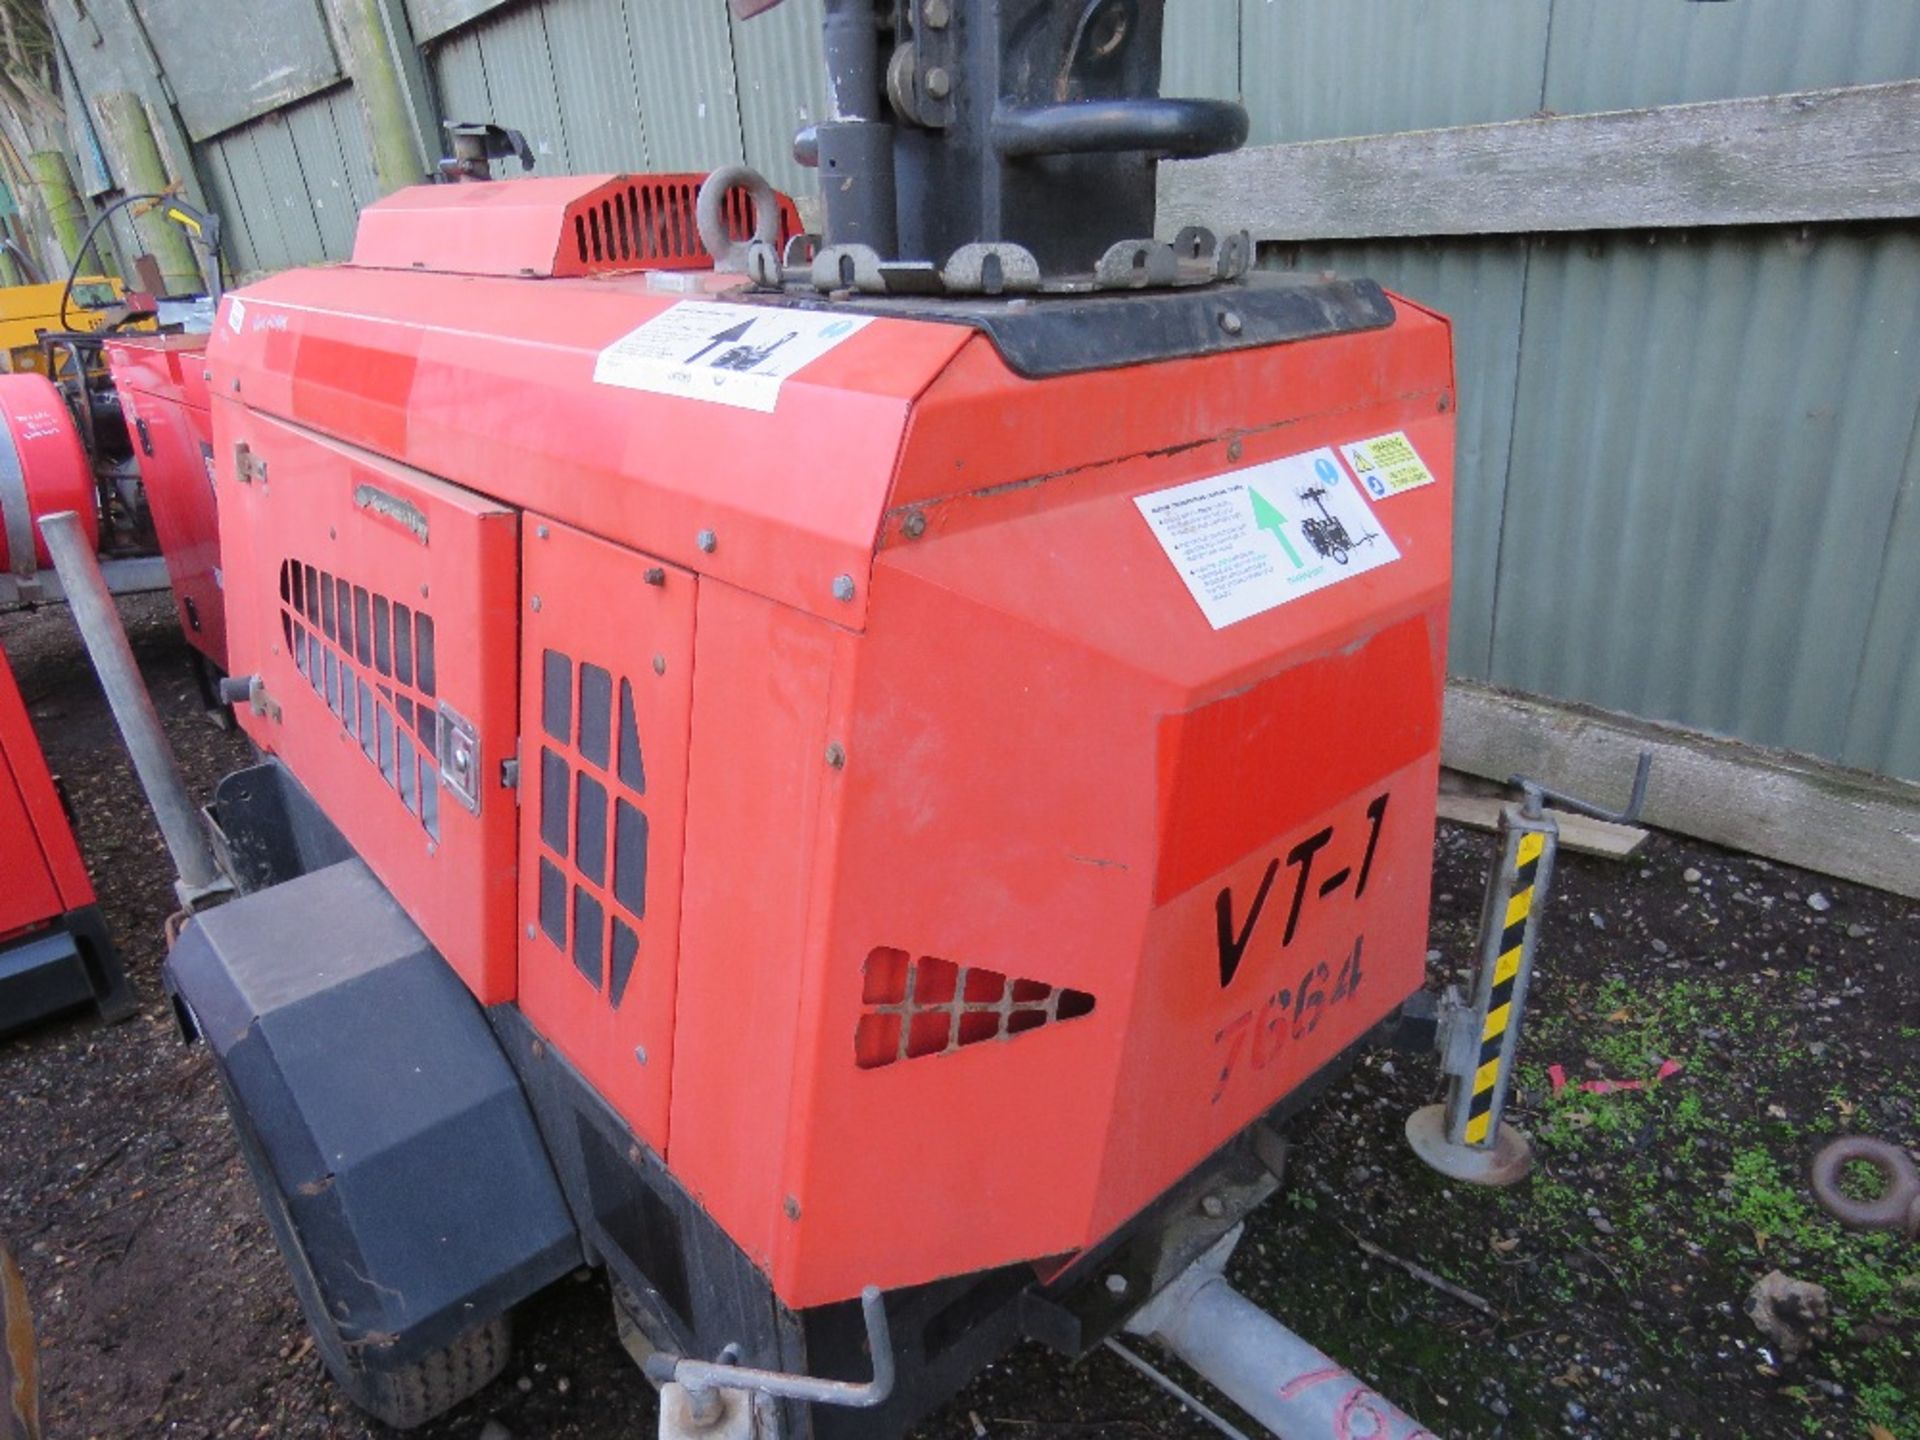 VT1 TOWED LIGHTING TOWER WITH KUBOTA ENGINE AND LINZ ALTERNATOR. SN: 800536. WHEN TESTED WAS SEEN TO - Image 5 of 9